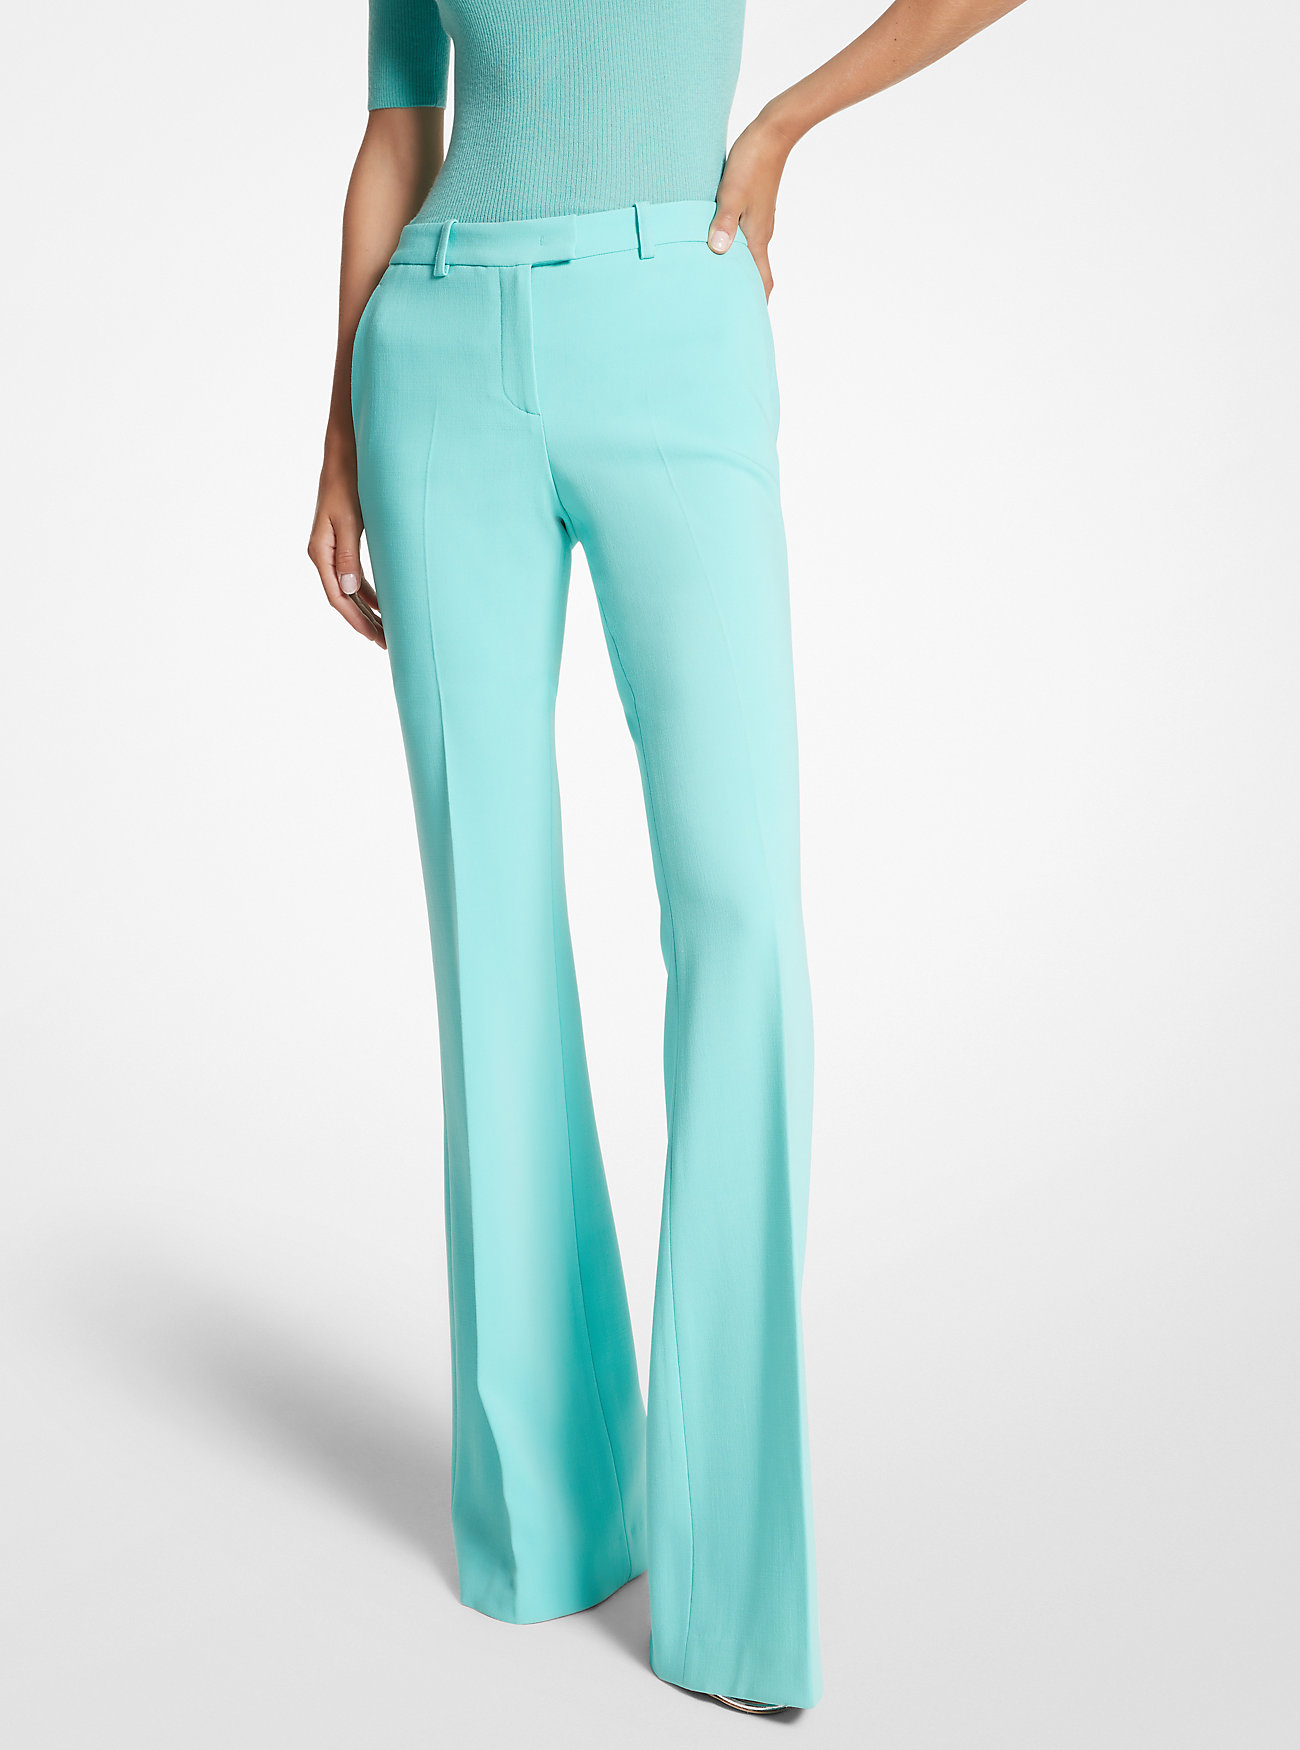 Michaelkors Haylee Stretch Pebble Crepe Flared Trousers